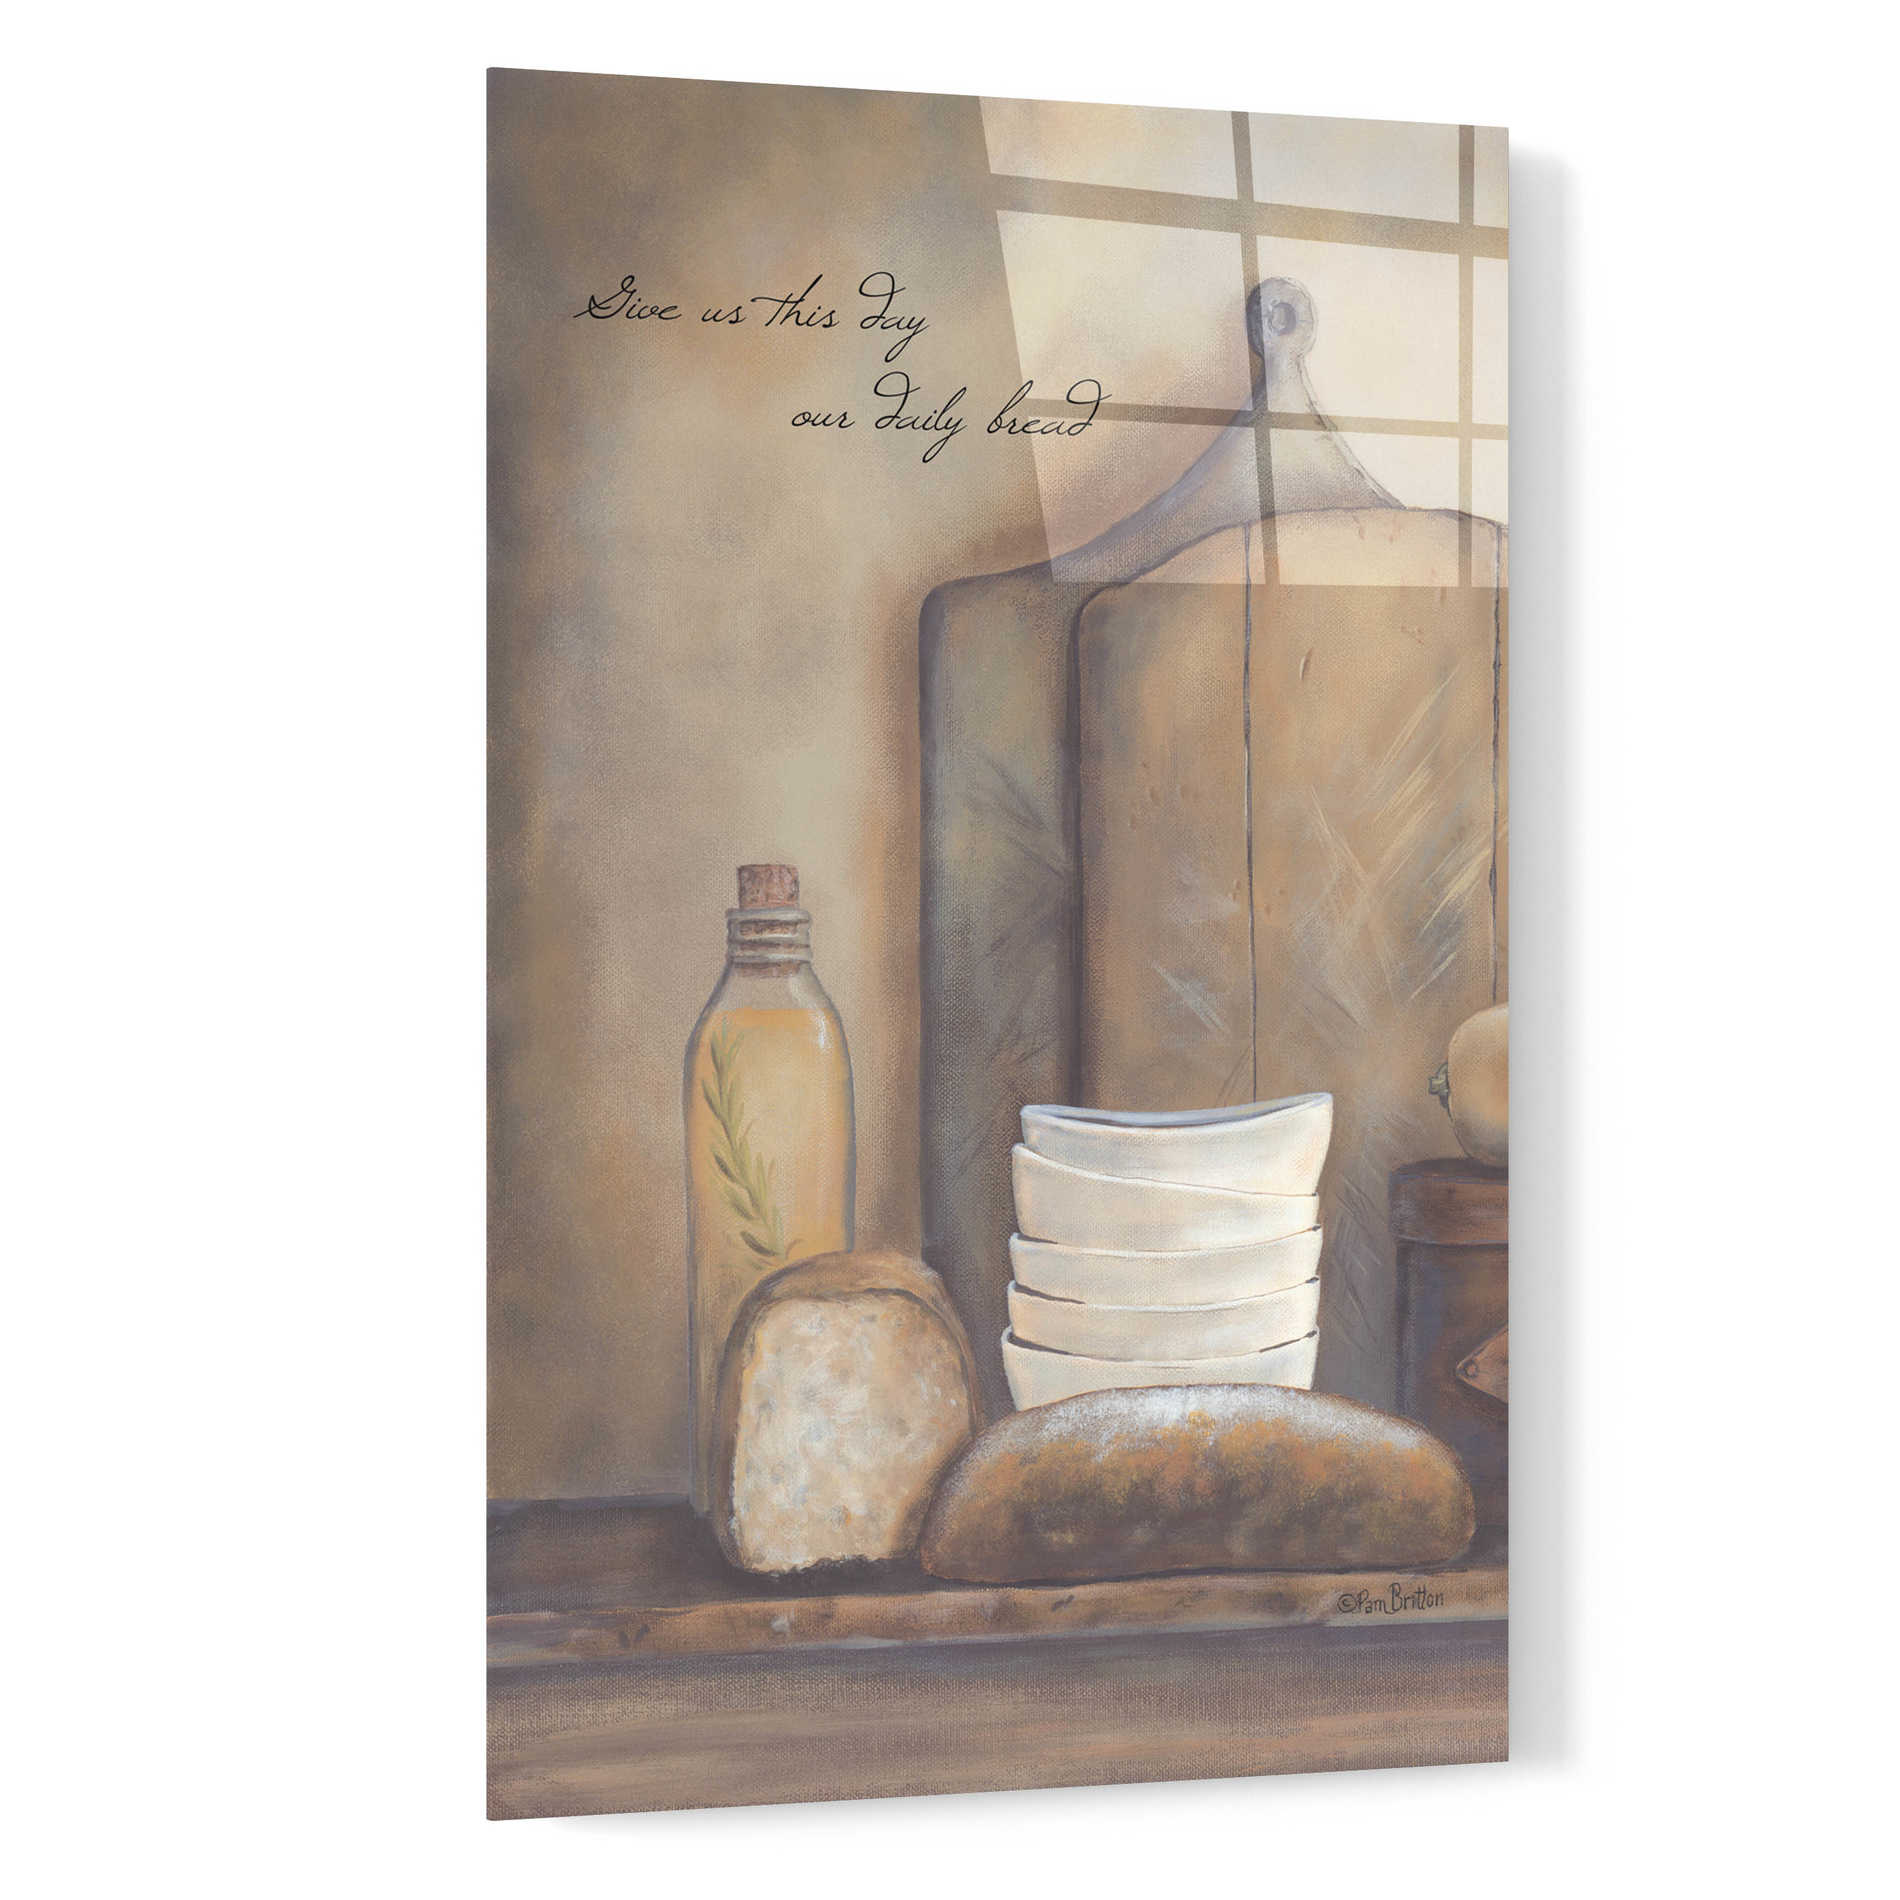 Epic Art 'Give Us This Day Our Daily Bread' by Pam Britton, Acrylic Glass Wall Art,16x24